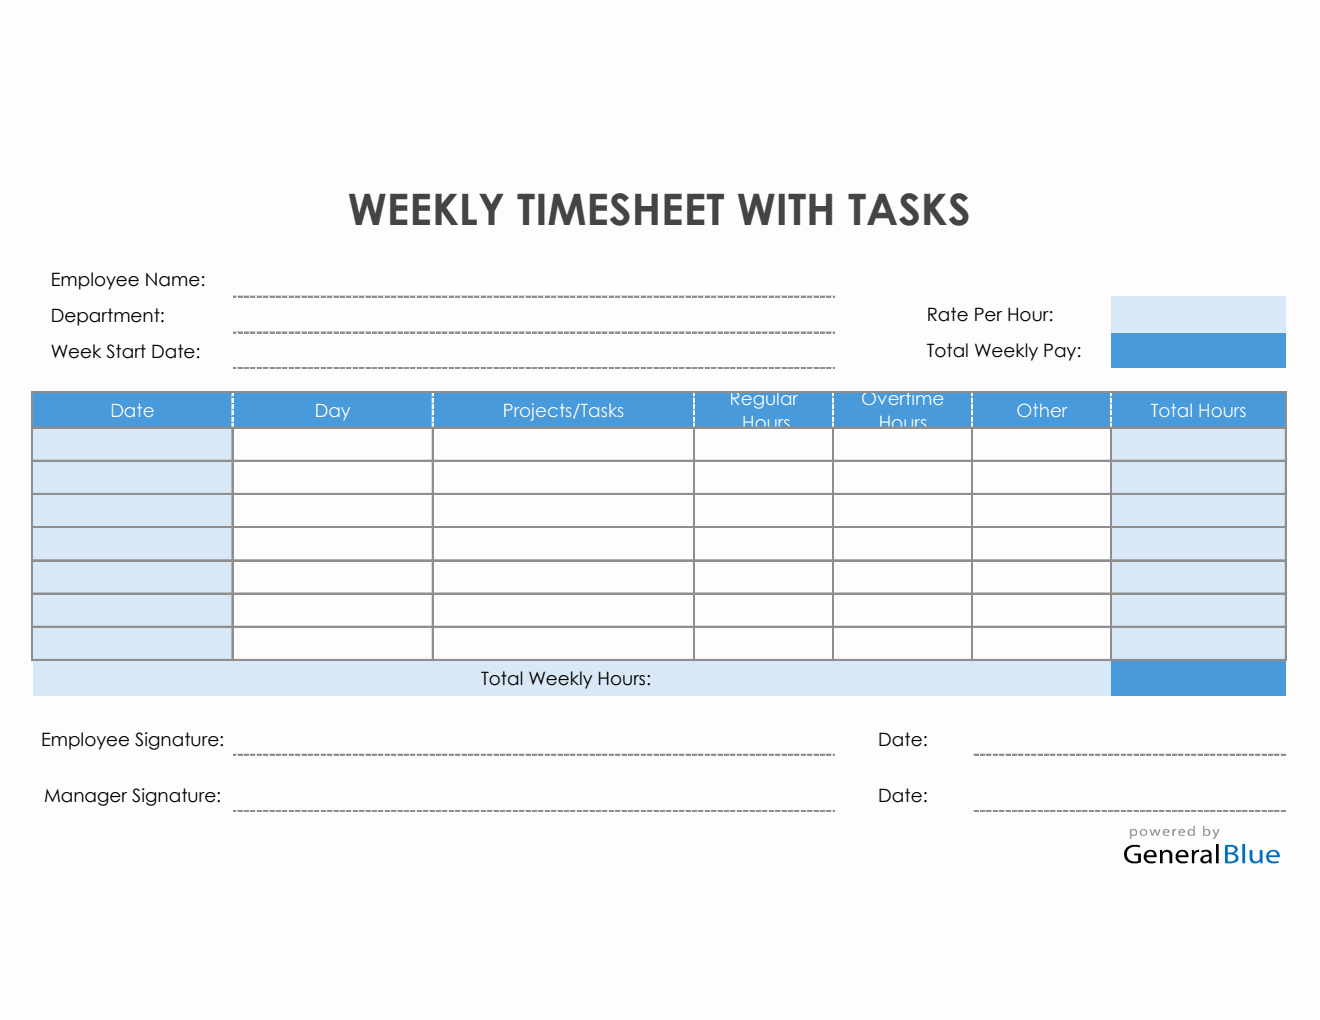 Weekly Timesheet With Tasks in Excel